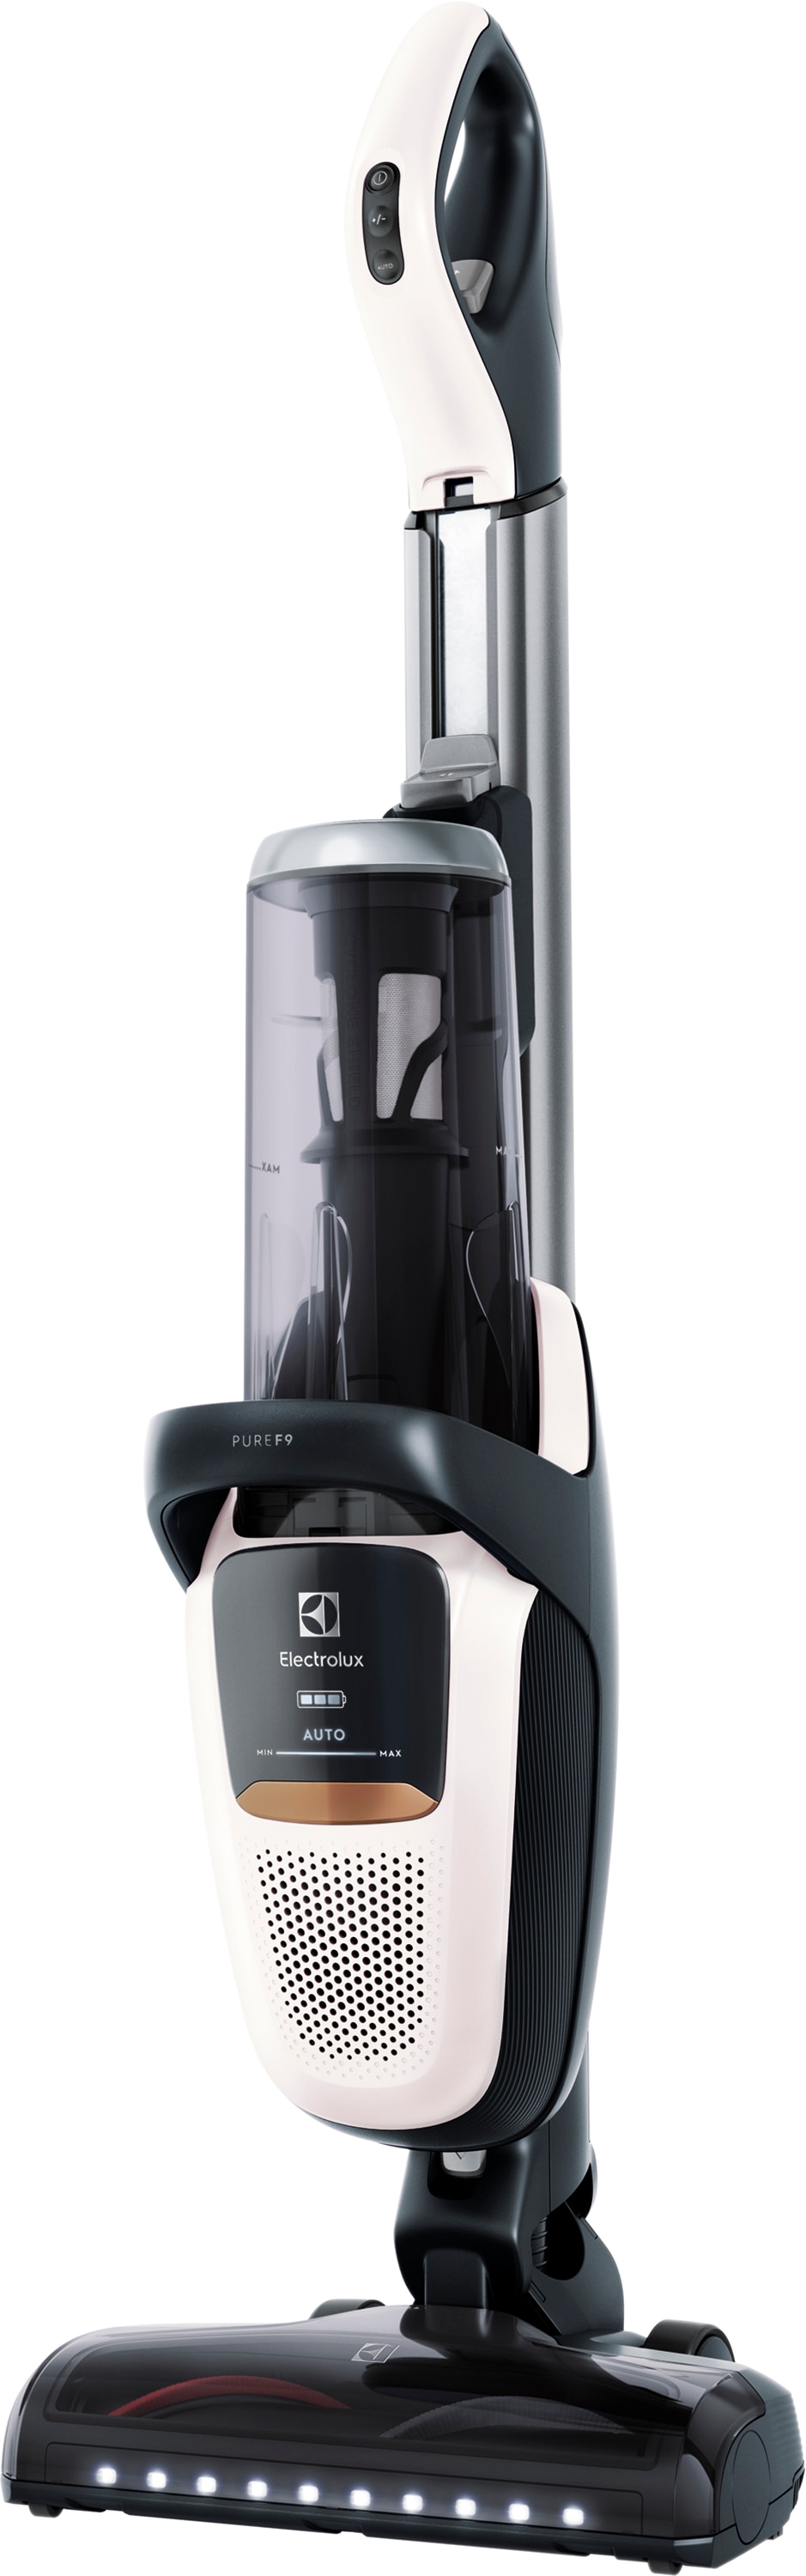 electrolux-launches-groundbreaking-cordless-vacuum-cleaner-electrolux